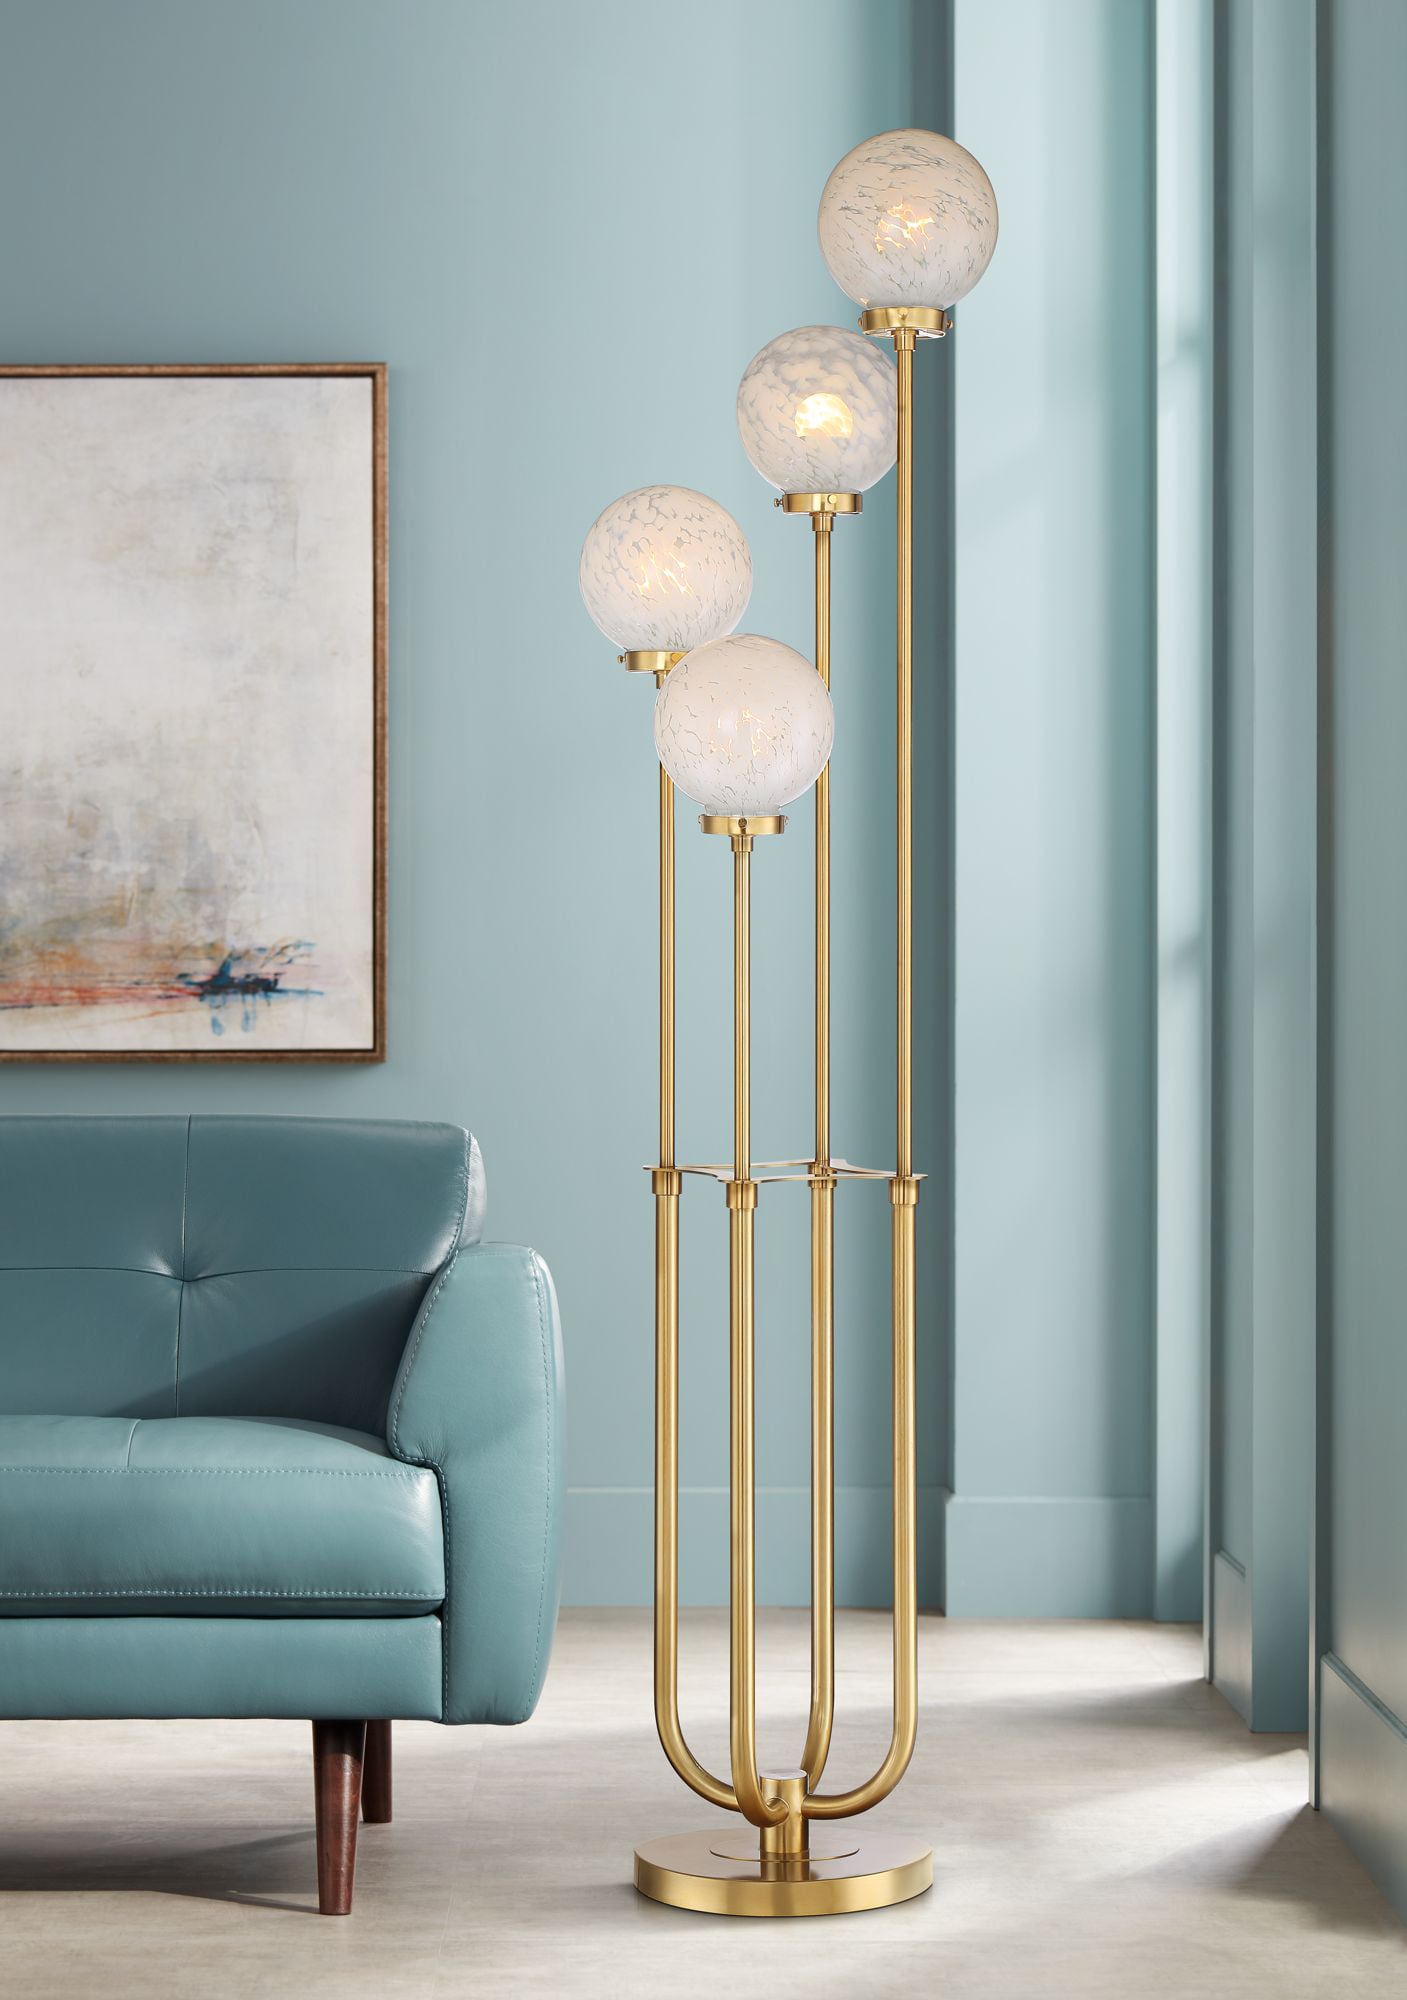 Possini Euro Design Mid Century Modern Glam Style Floor Lamp 4 Light Led  68.5" Tall Warm Gold Glass Globe Shade For Living Room House Uplight –  Walmart With Regard To Mid Century Floor Lamps (Photo 2 of 15)